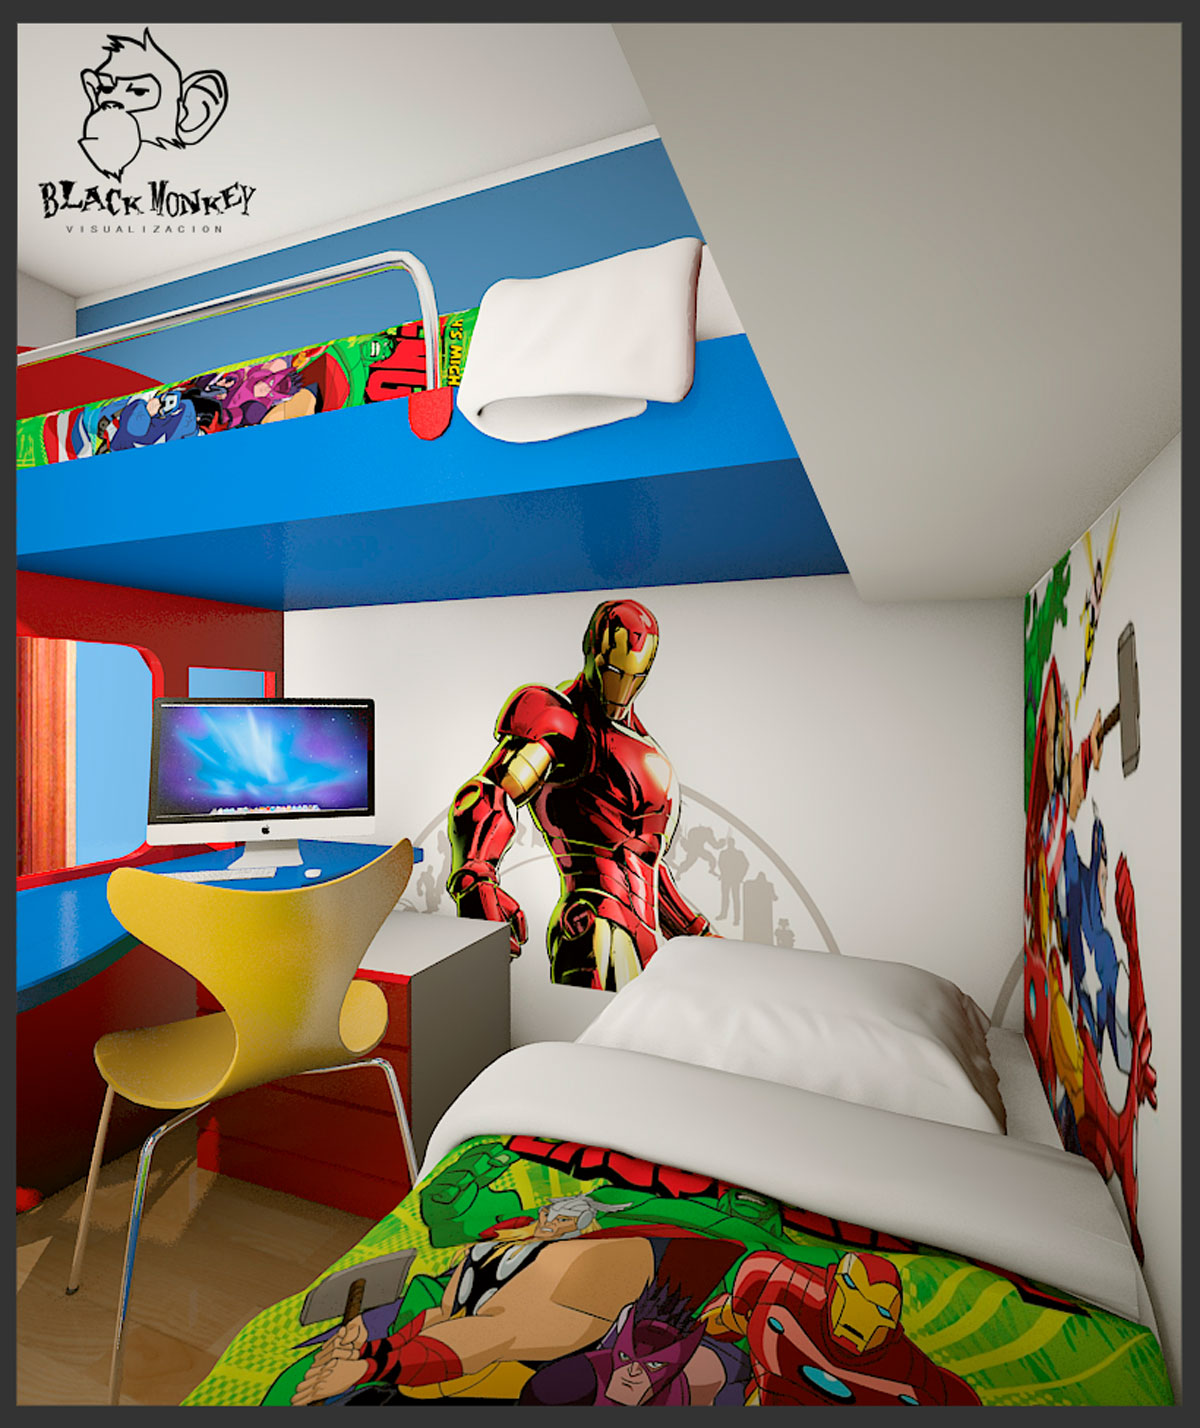 Bedroom Iron Kids Marvelous Bedroom Iron Man Themed Kids Room Furniture Decor For Boys Decor Ideas With Cool Iron Man Wall Decal Design And Modern Blue L Shape Computer Desk Also Blue Loft Bed Along With Twin Bed Furniture Composing The Special Type Of Kids Room Furniture